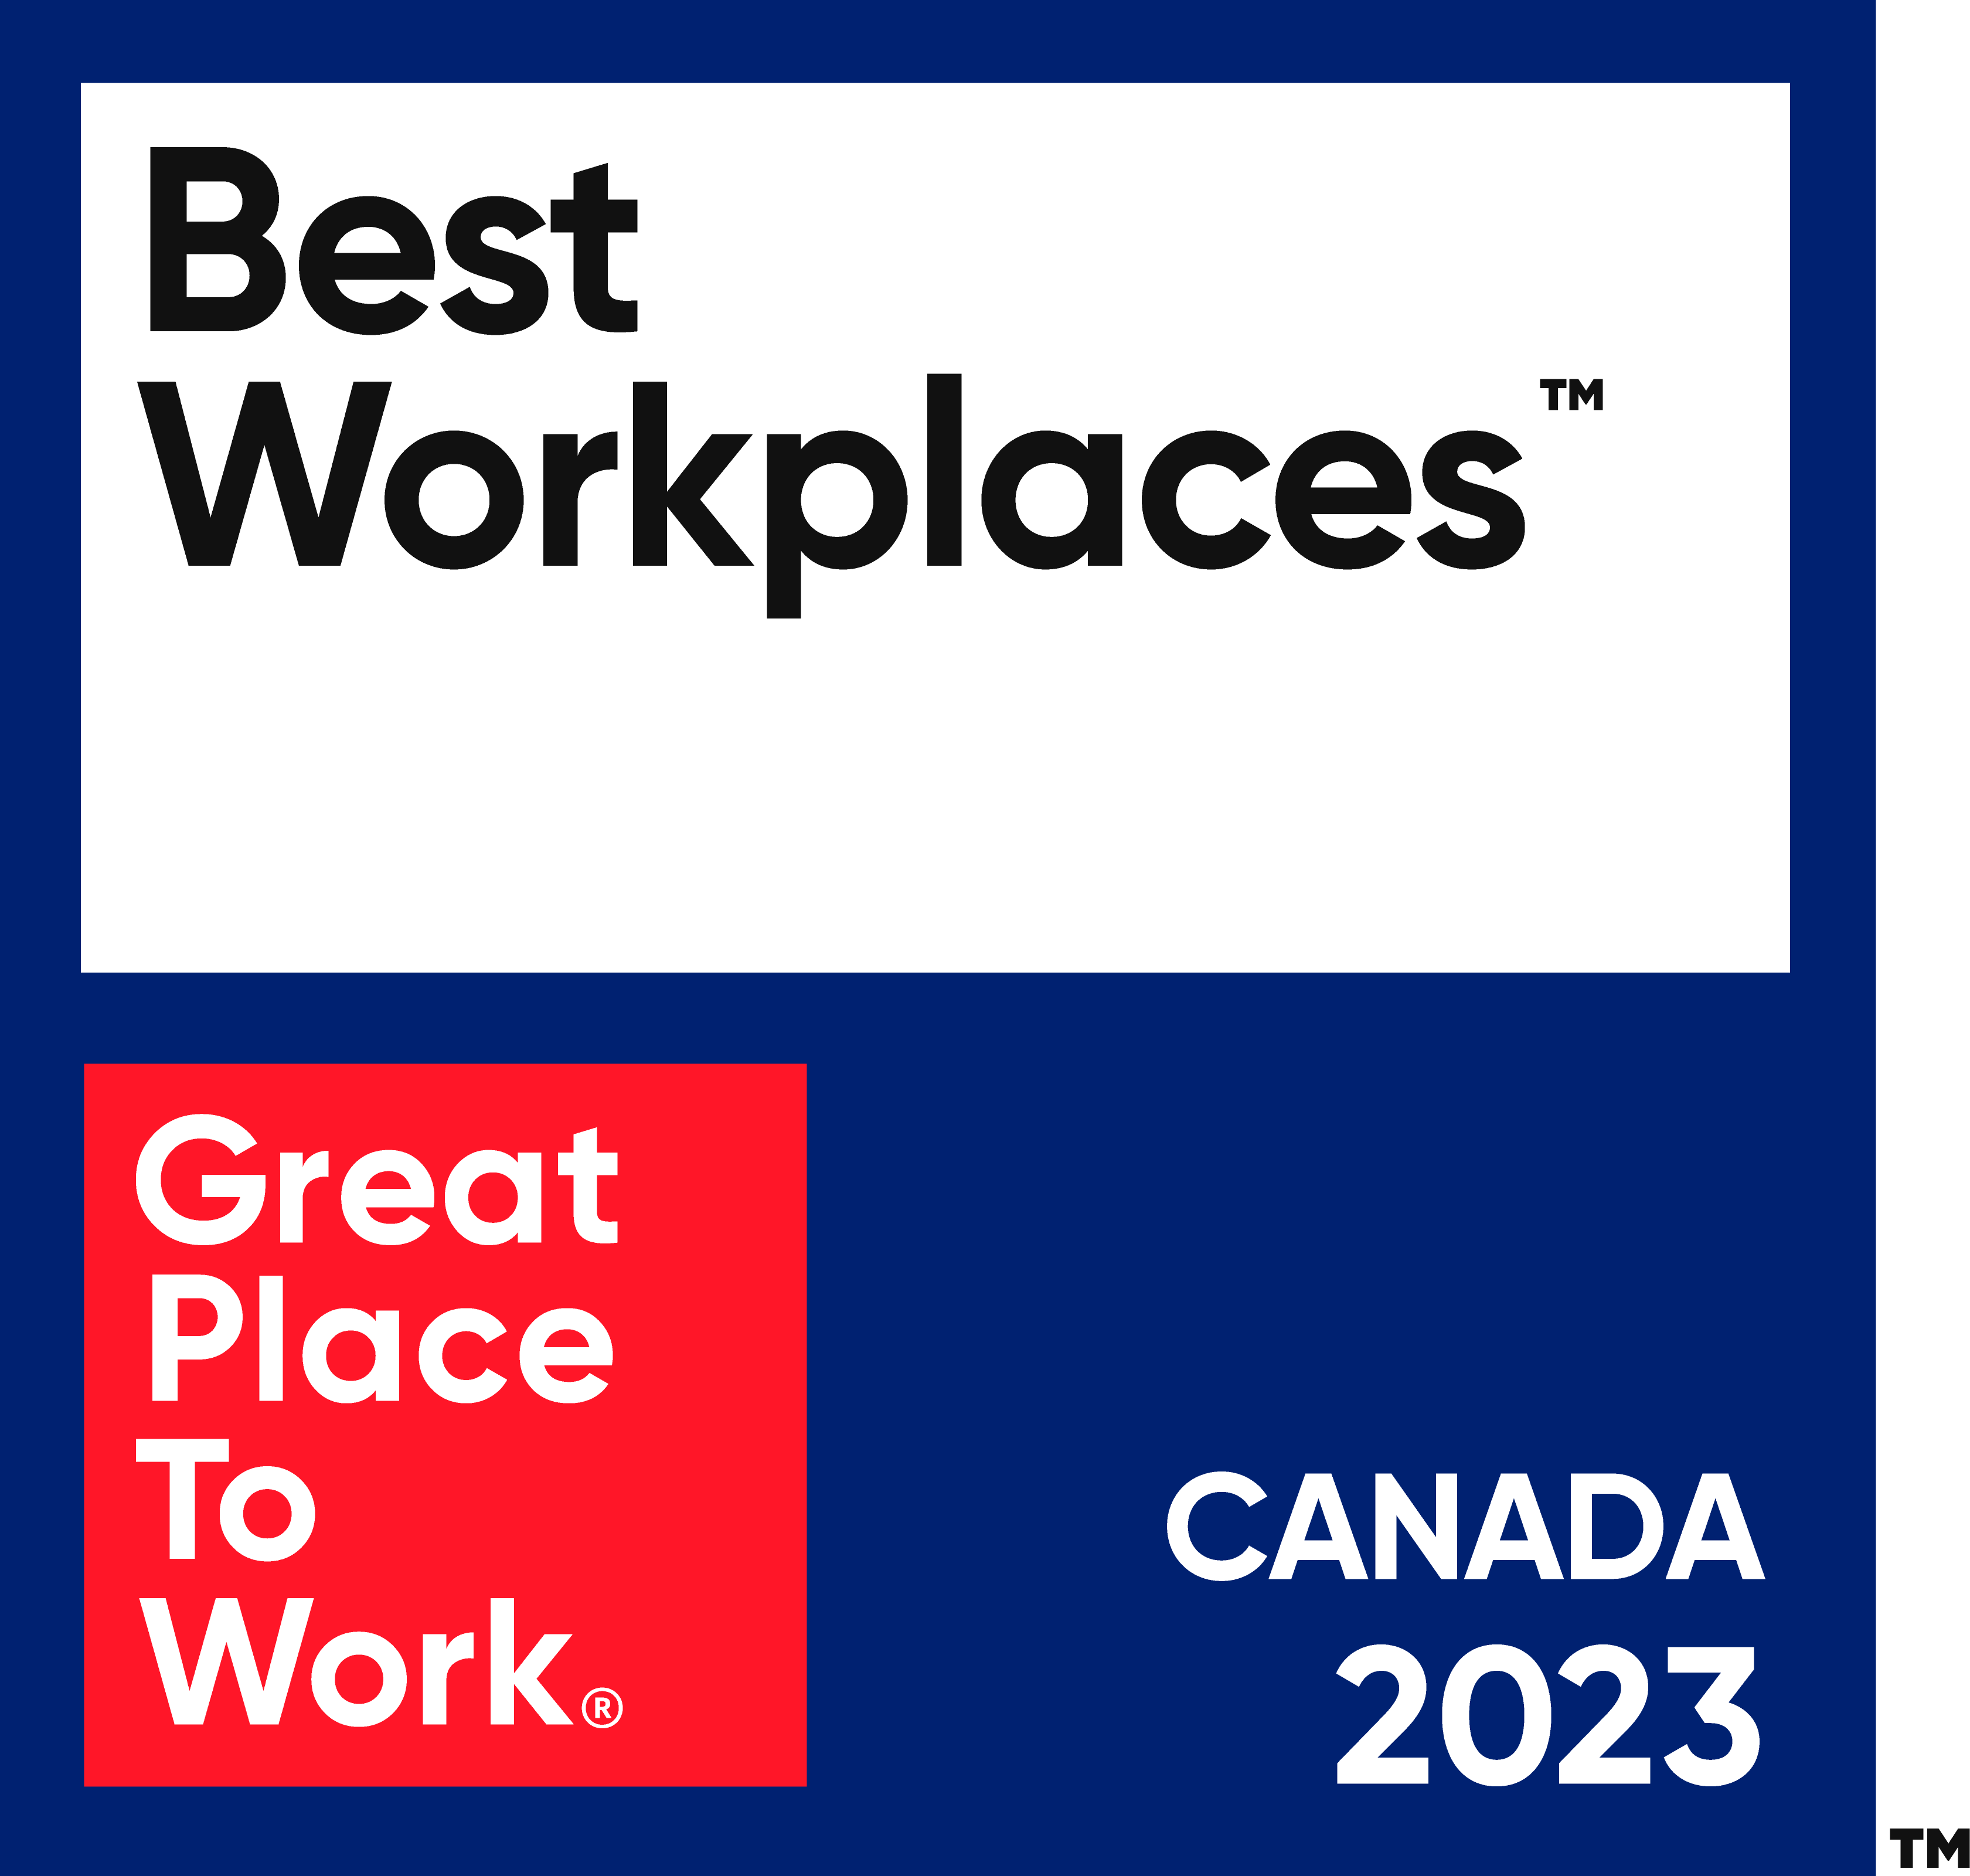 great place to work in Canada 2023